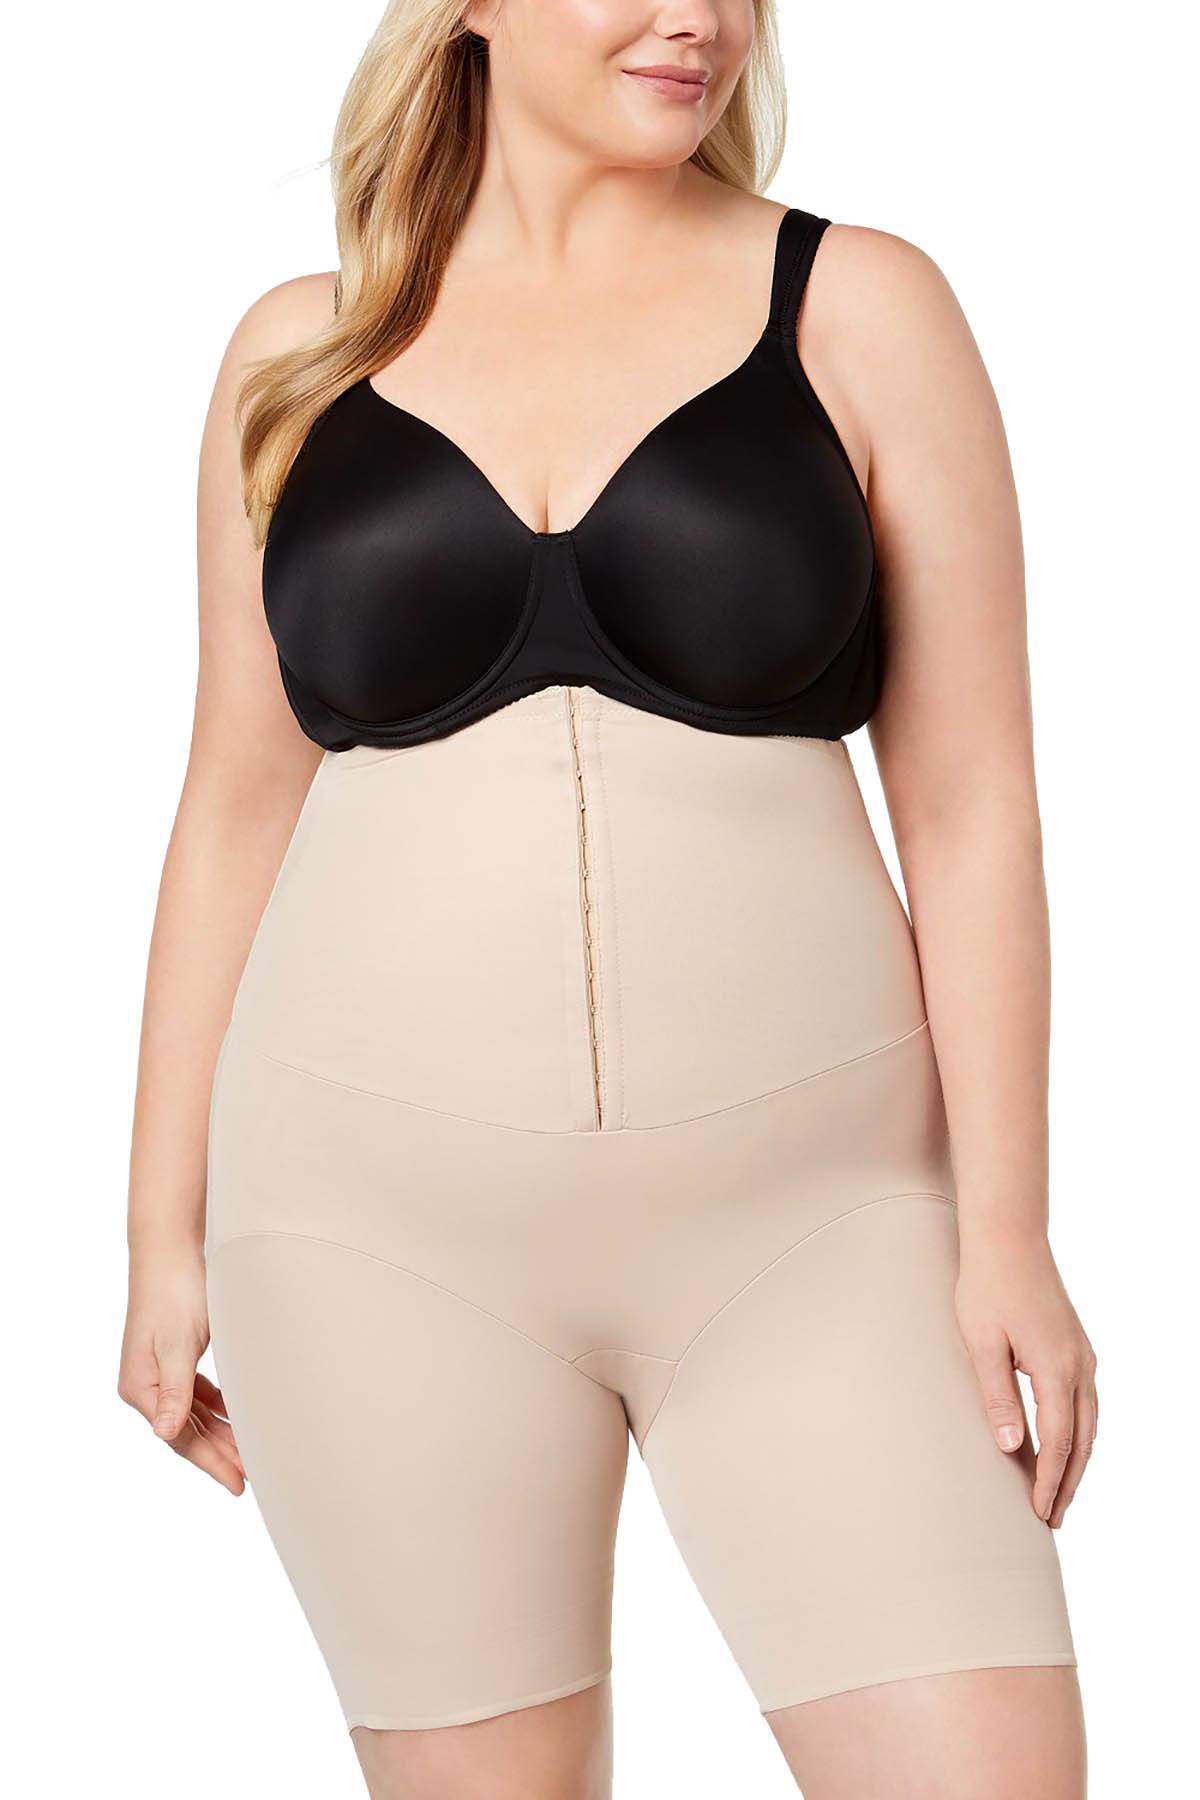 Miraclesuit Nude Extra Firm Control Thigh Slimming Cincher